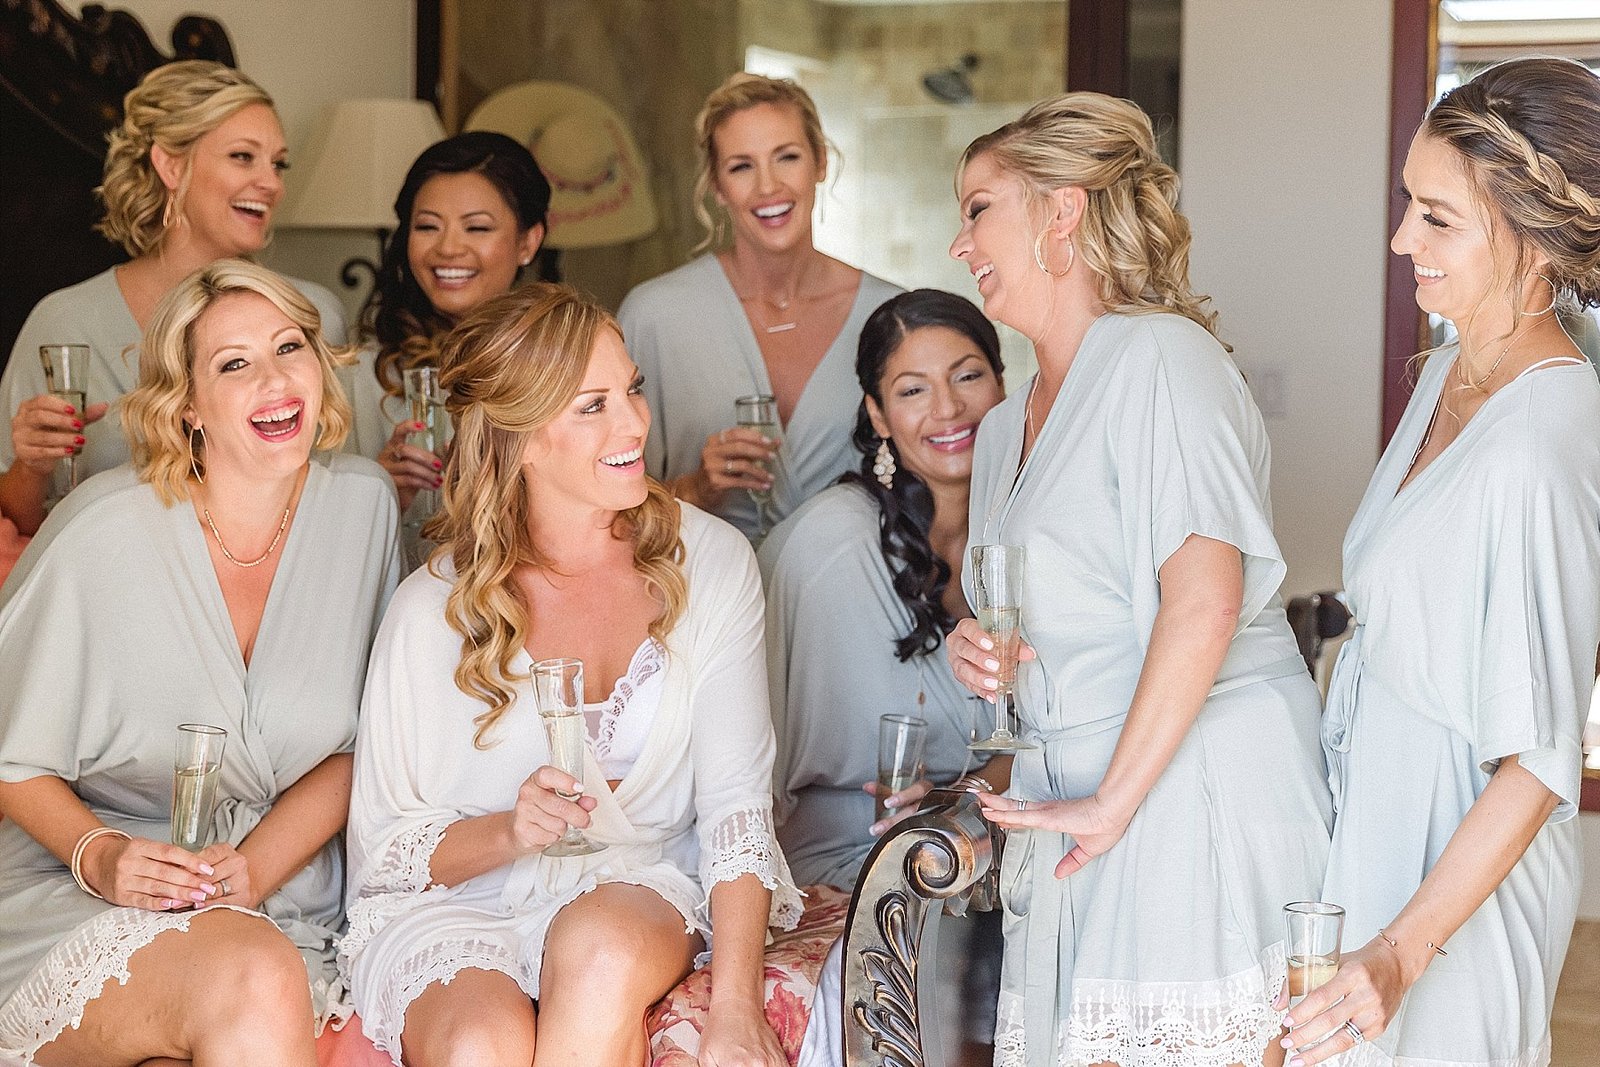 Bride drinking Champagne with her Bridesmaids at Hacienda Encantada in Cabo San Lucas, Mexico. Wedding Planning by Cabo Wedding Services and the Wedding took place at Flora Farms.